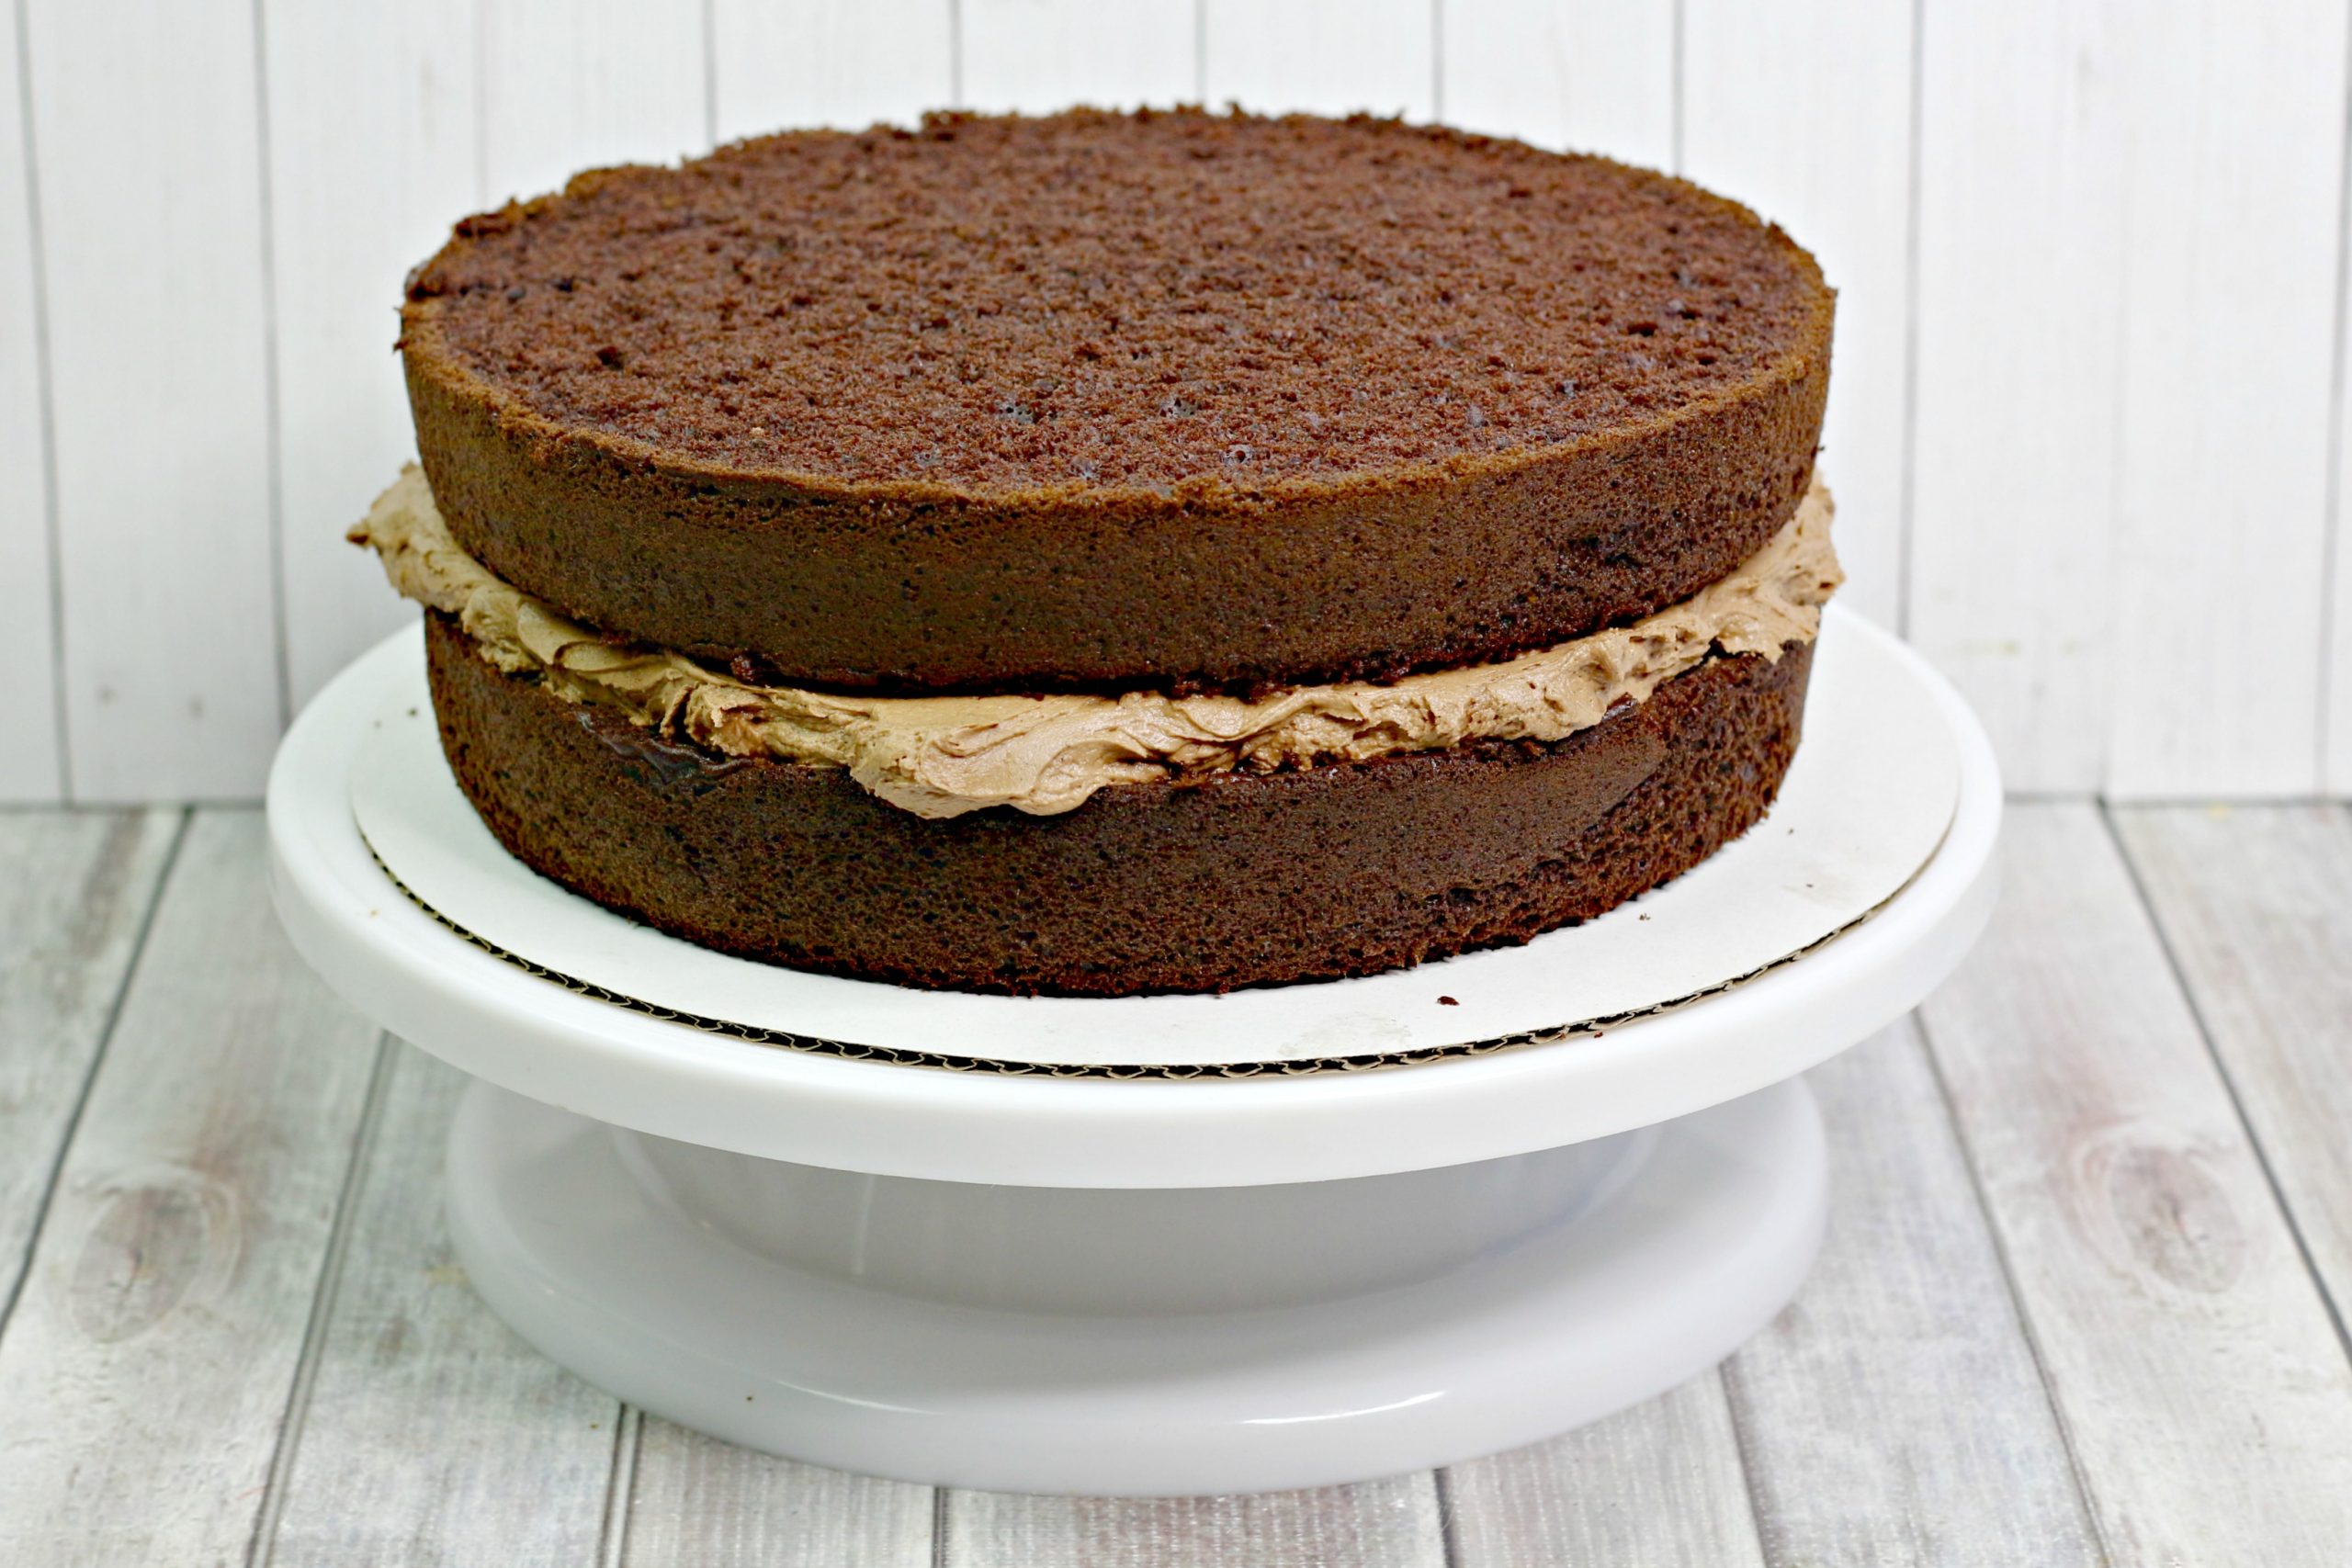 Two layers of the cake with chocolate frosting in the middle.